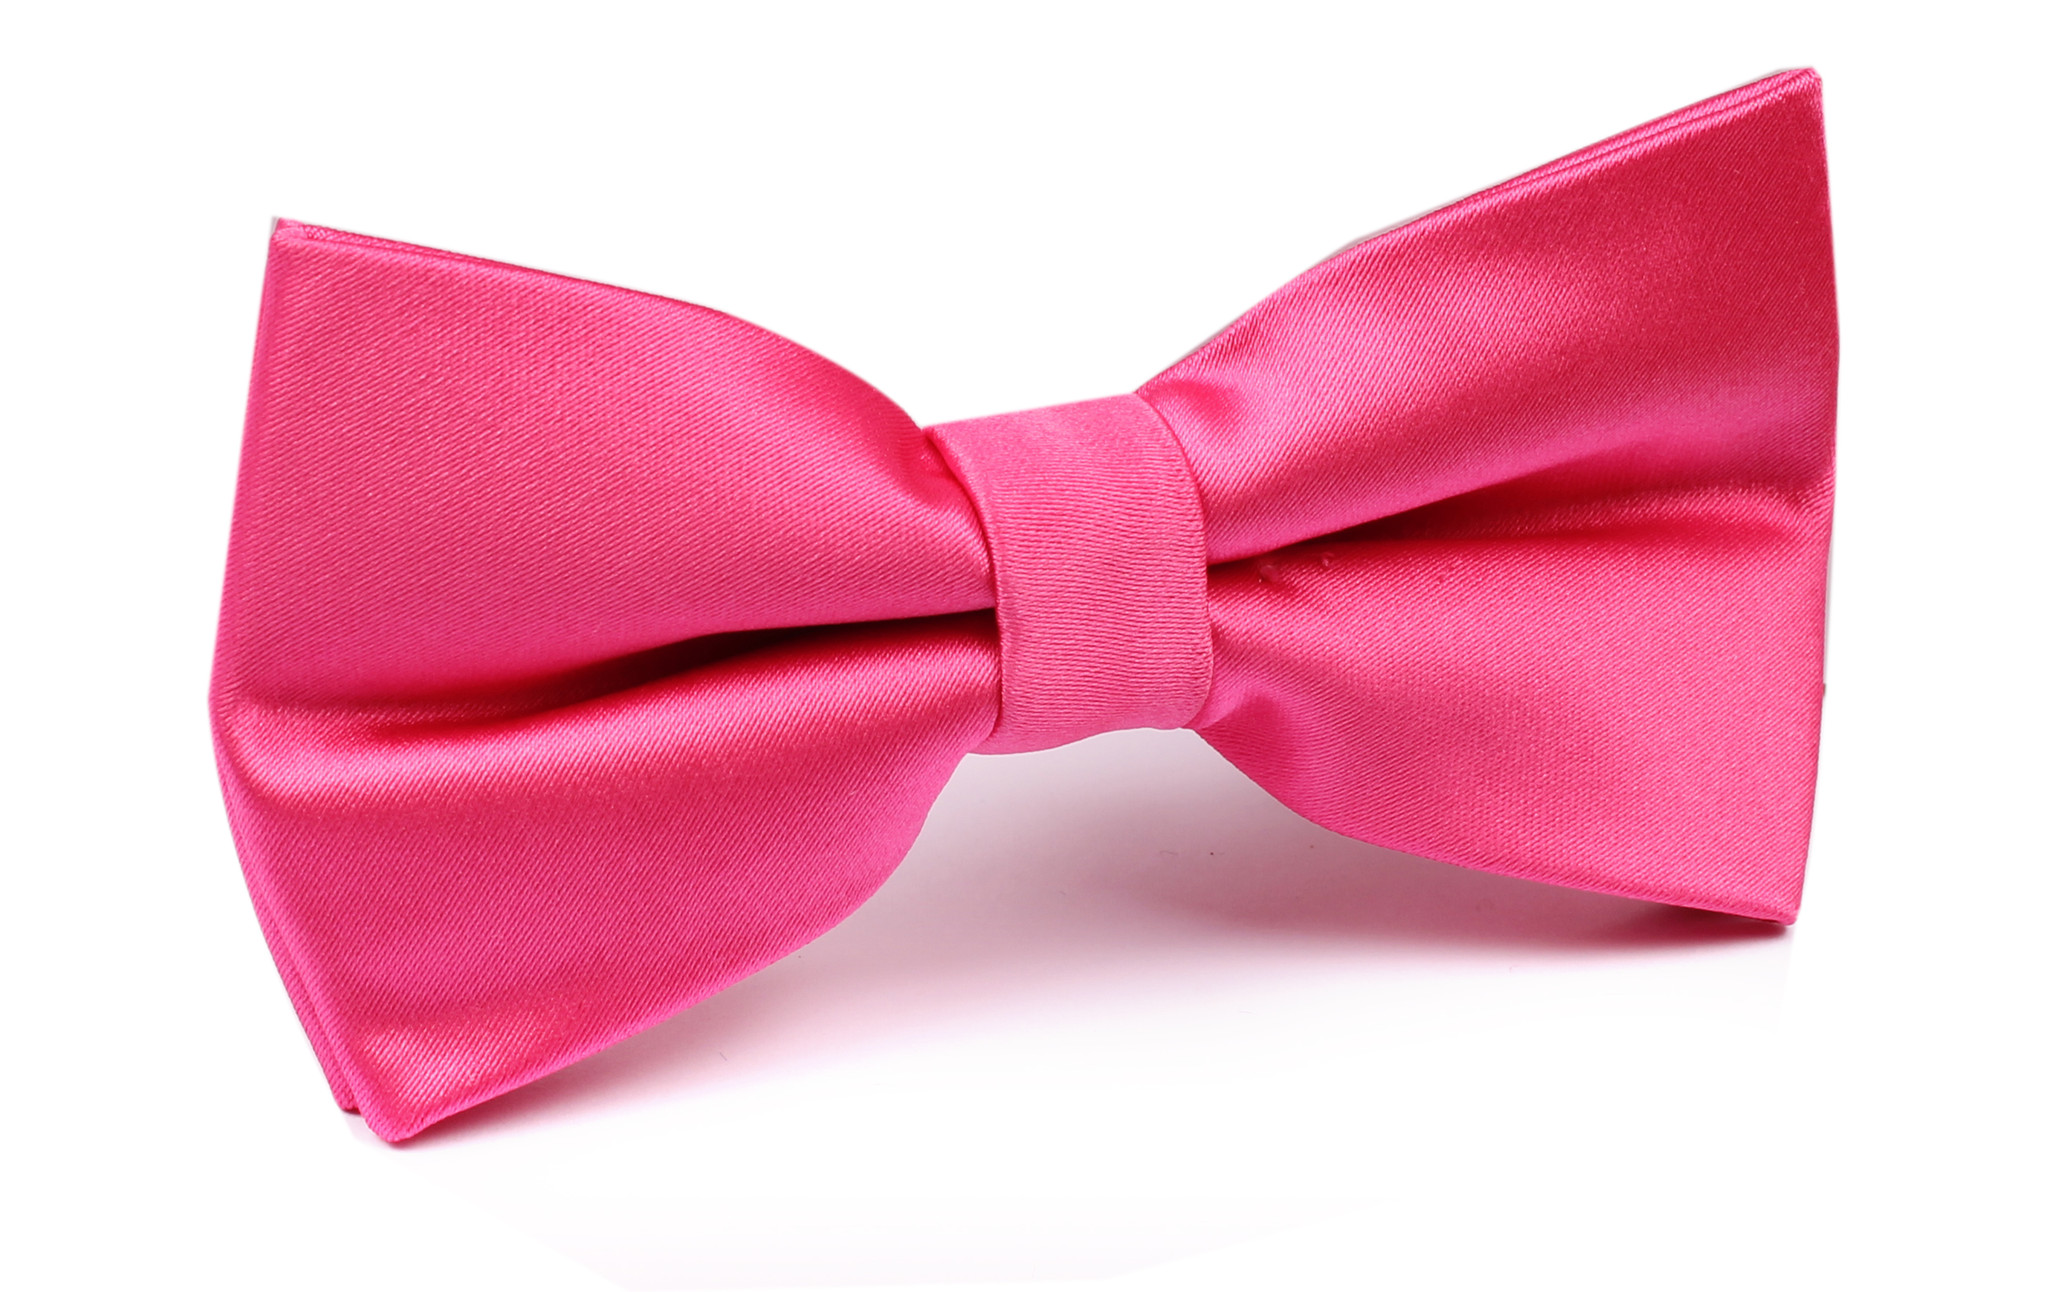 Hot Pink Bow Hot Pink Bow Tie Jpg V 1369647651